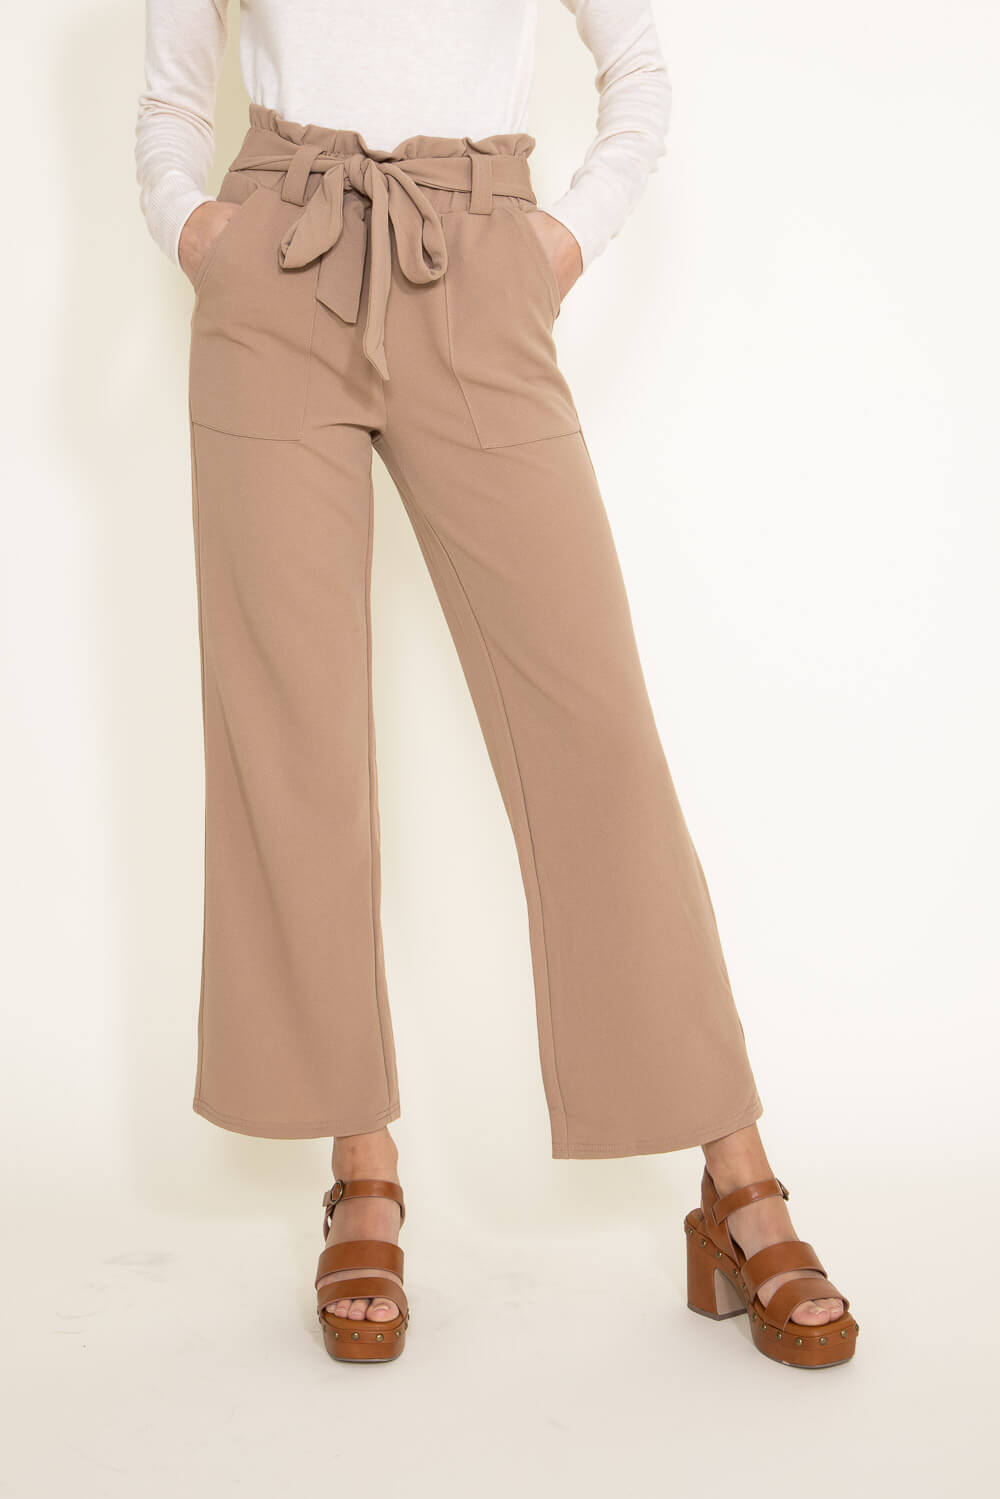 Dotted Smocked Waist Wide Leg Pants for Women in Taupe